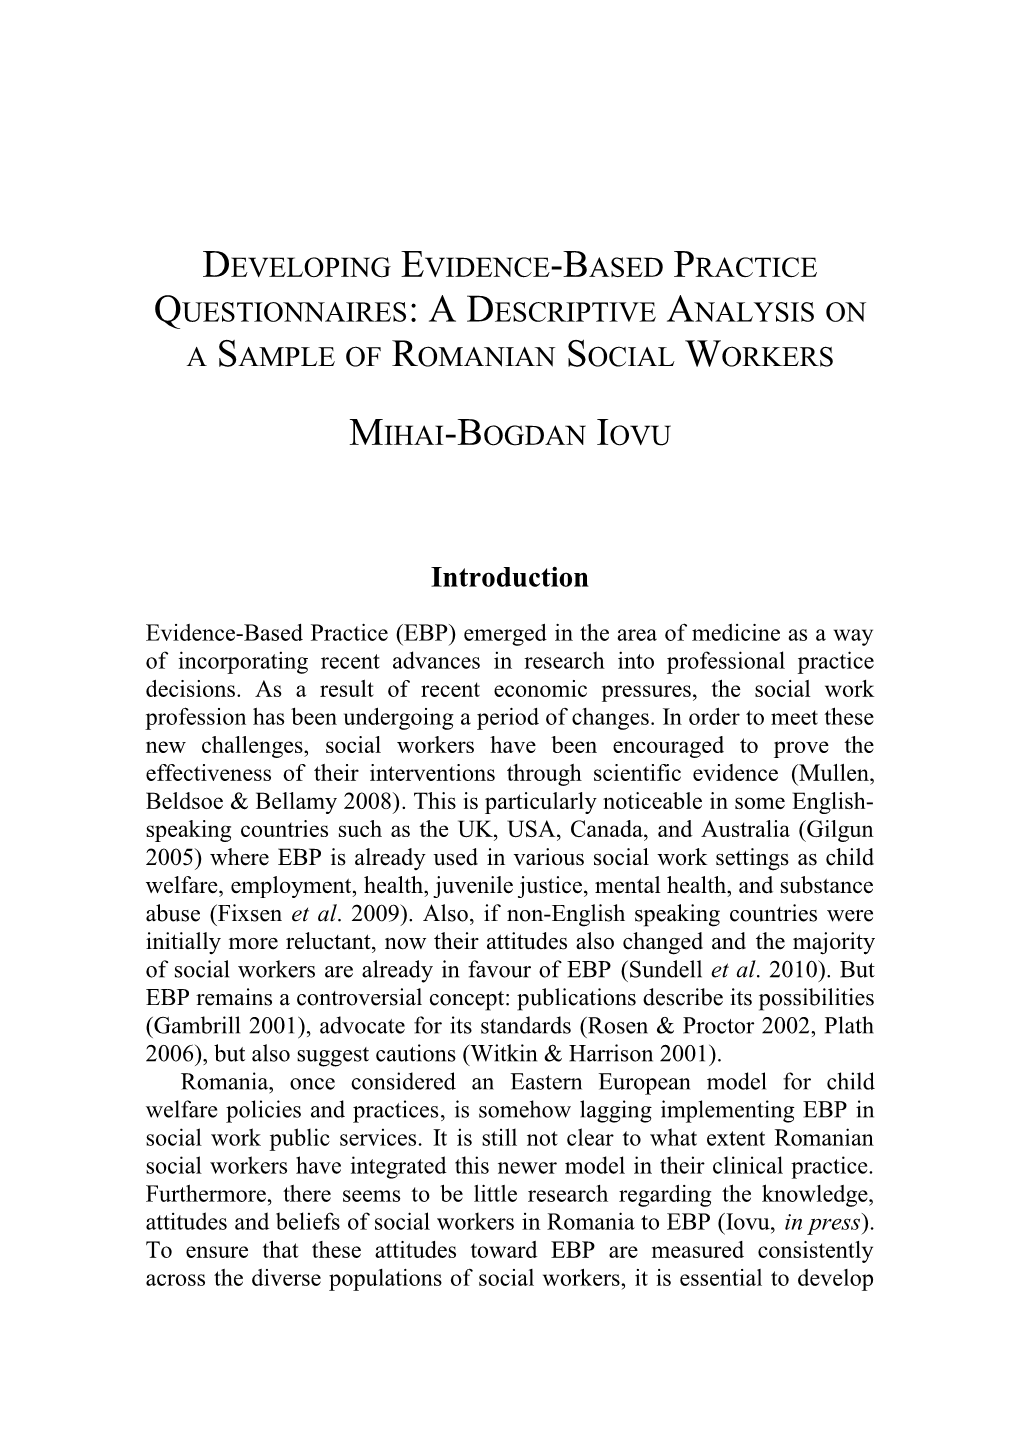 Development of Evidence-Based Practice Questionnaire: a Descriptive Analysis in a Sample